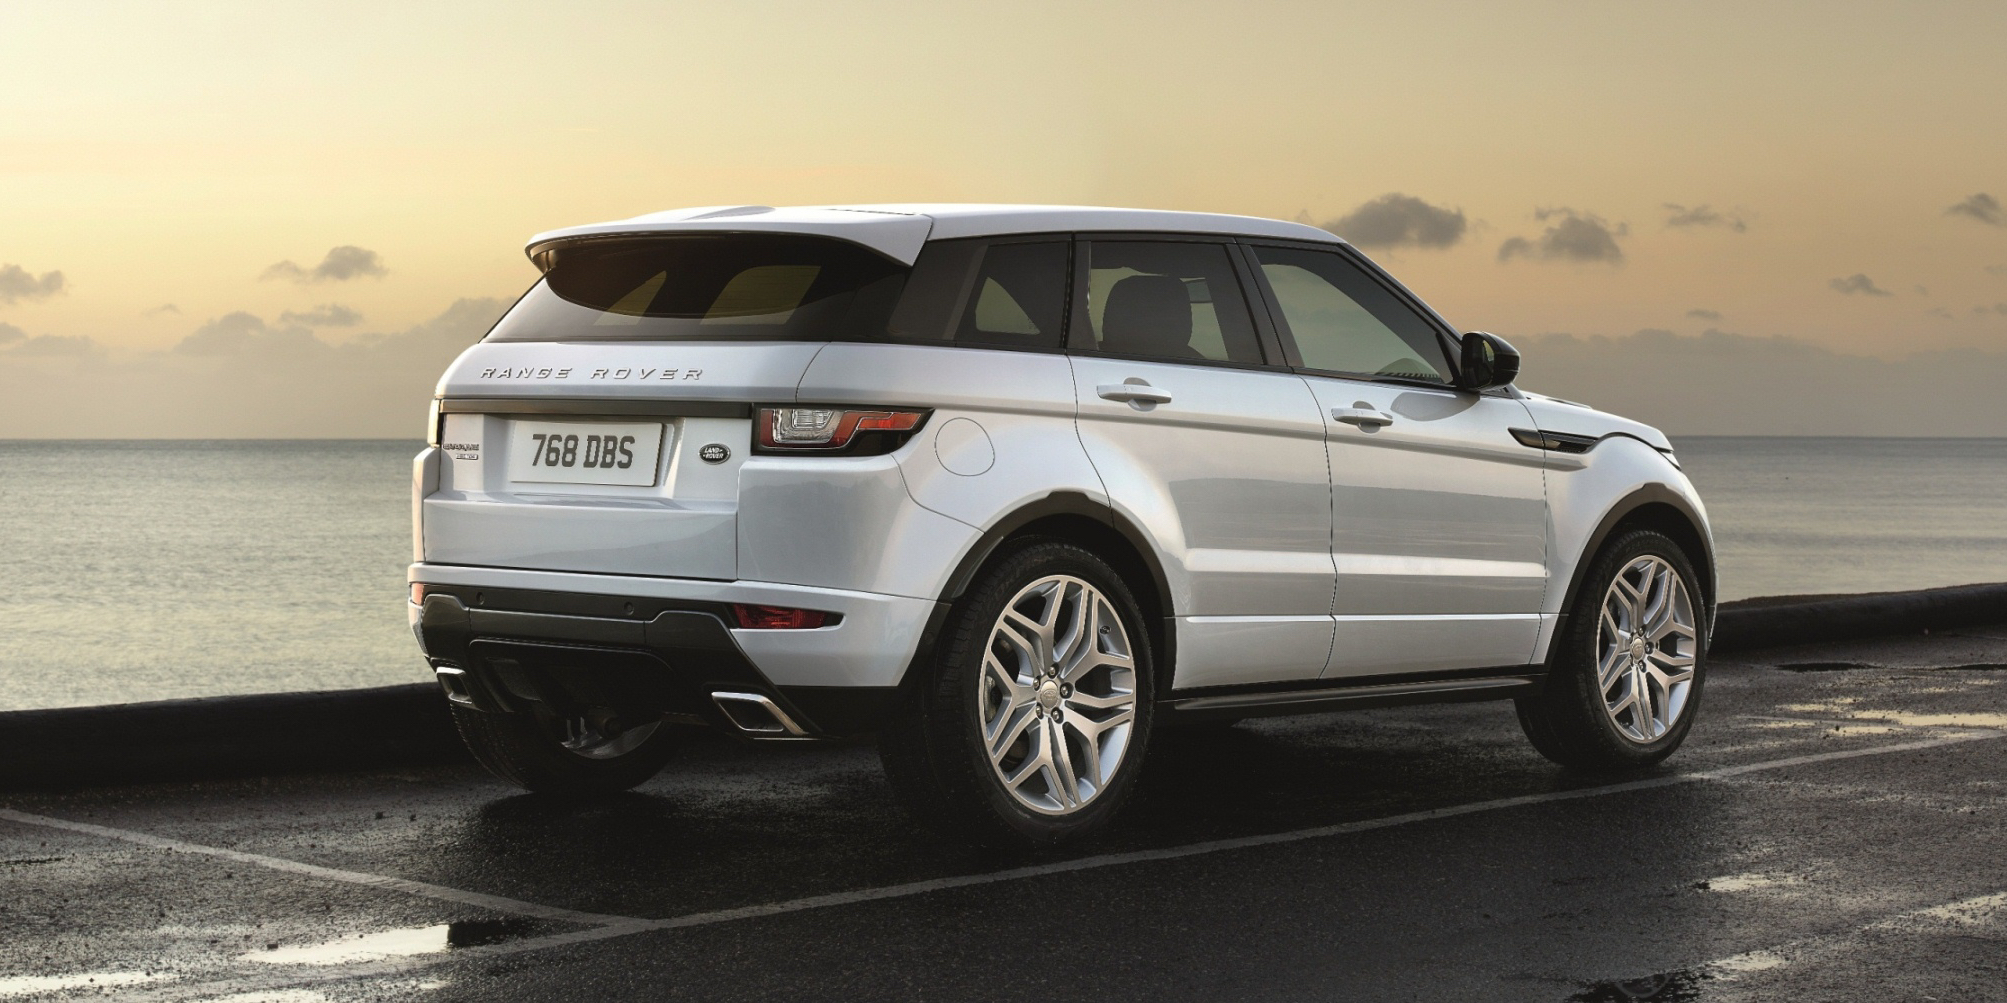 2016 Range Rover Evoque pricing and specifications